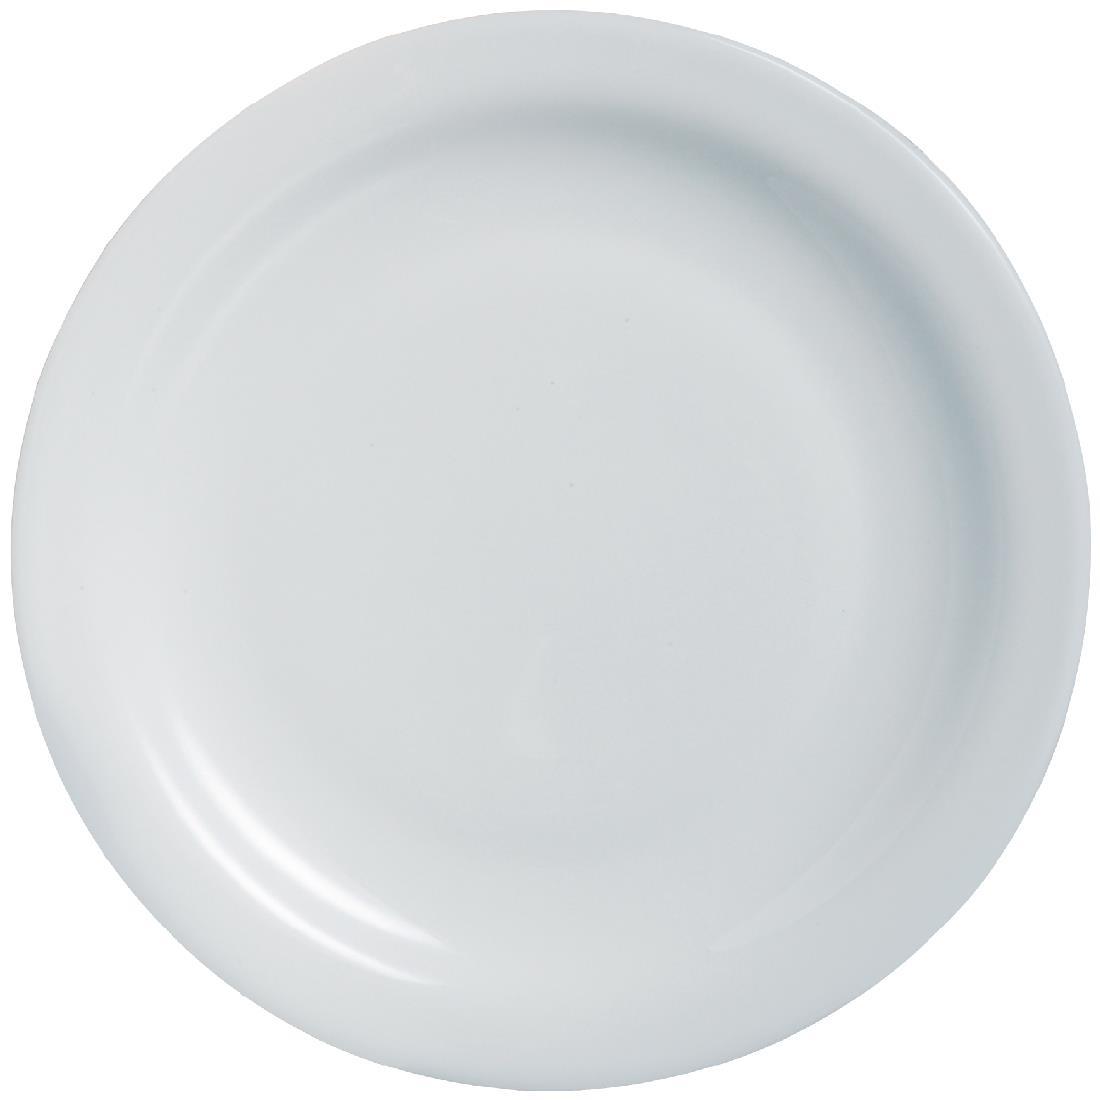 Arcoroc Opal Hoteliere Narrow Rim Plates 236mm (Pack of 6) - DP061  - 1